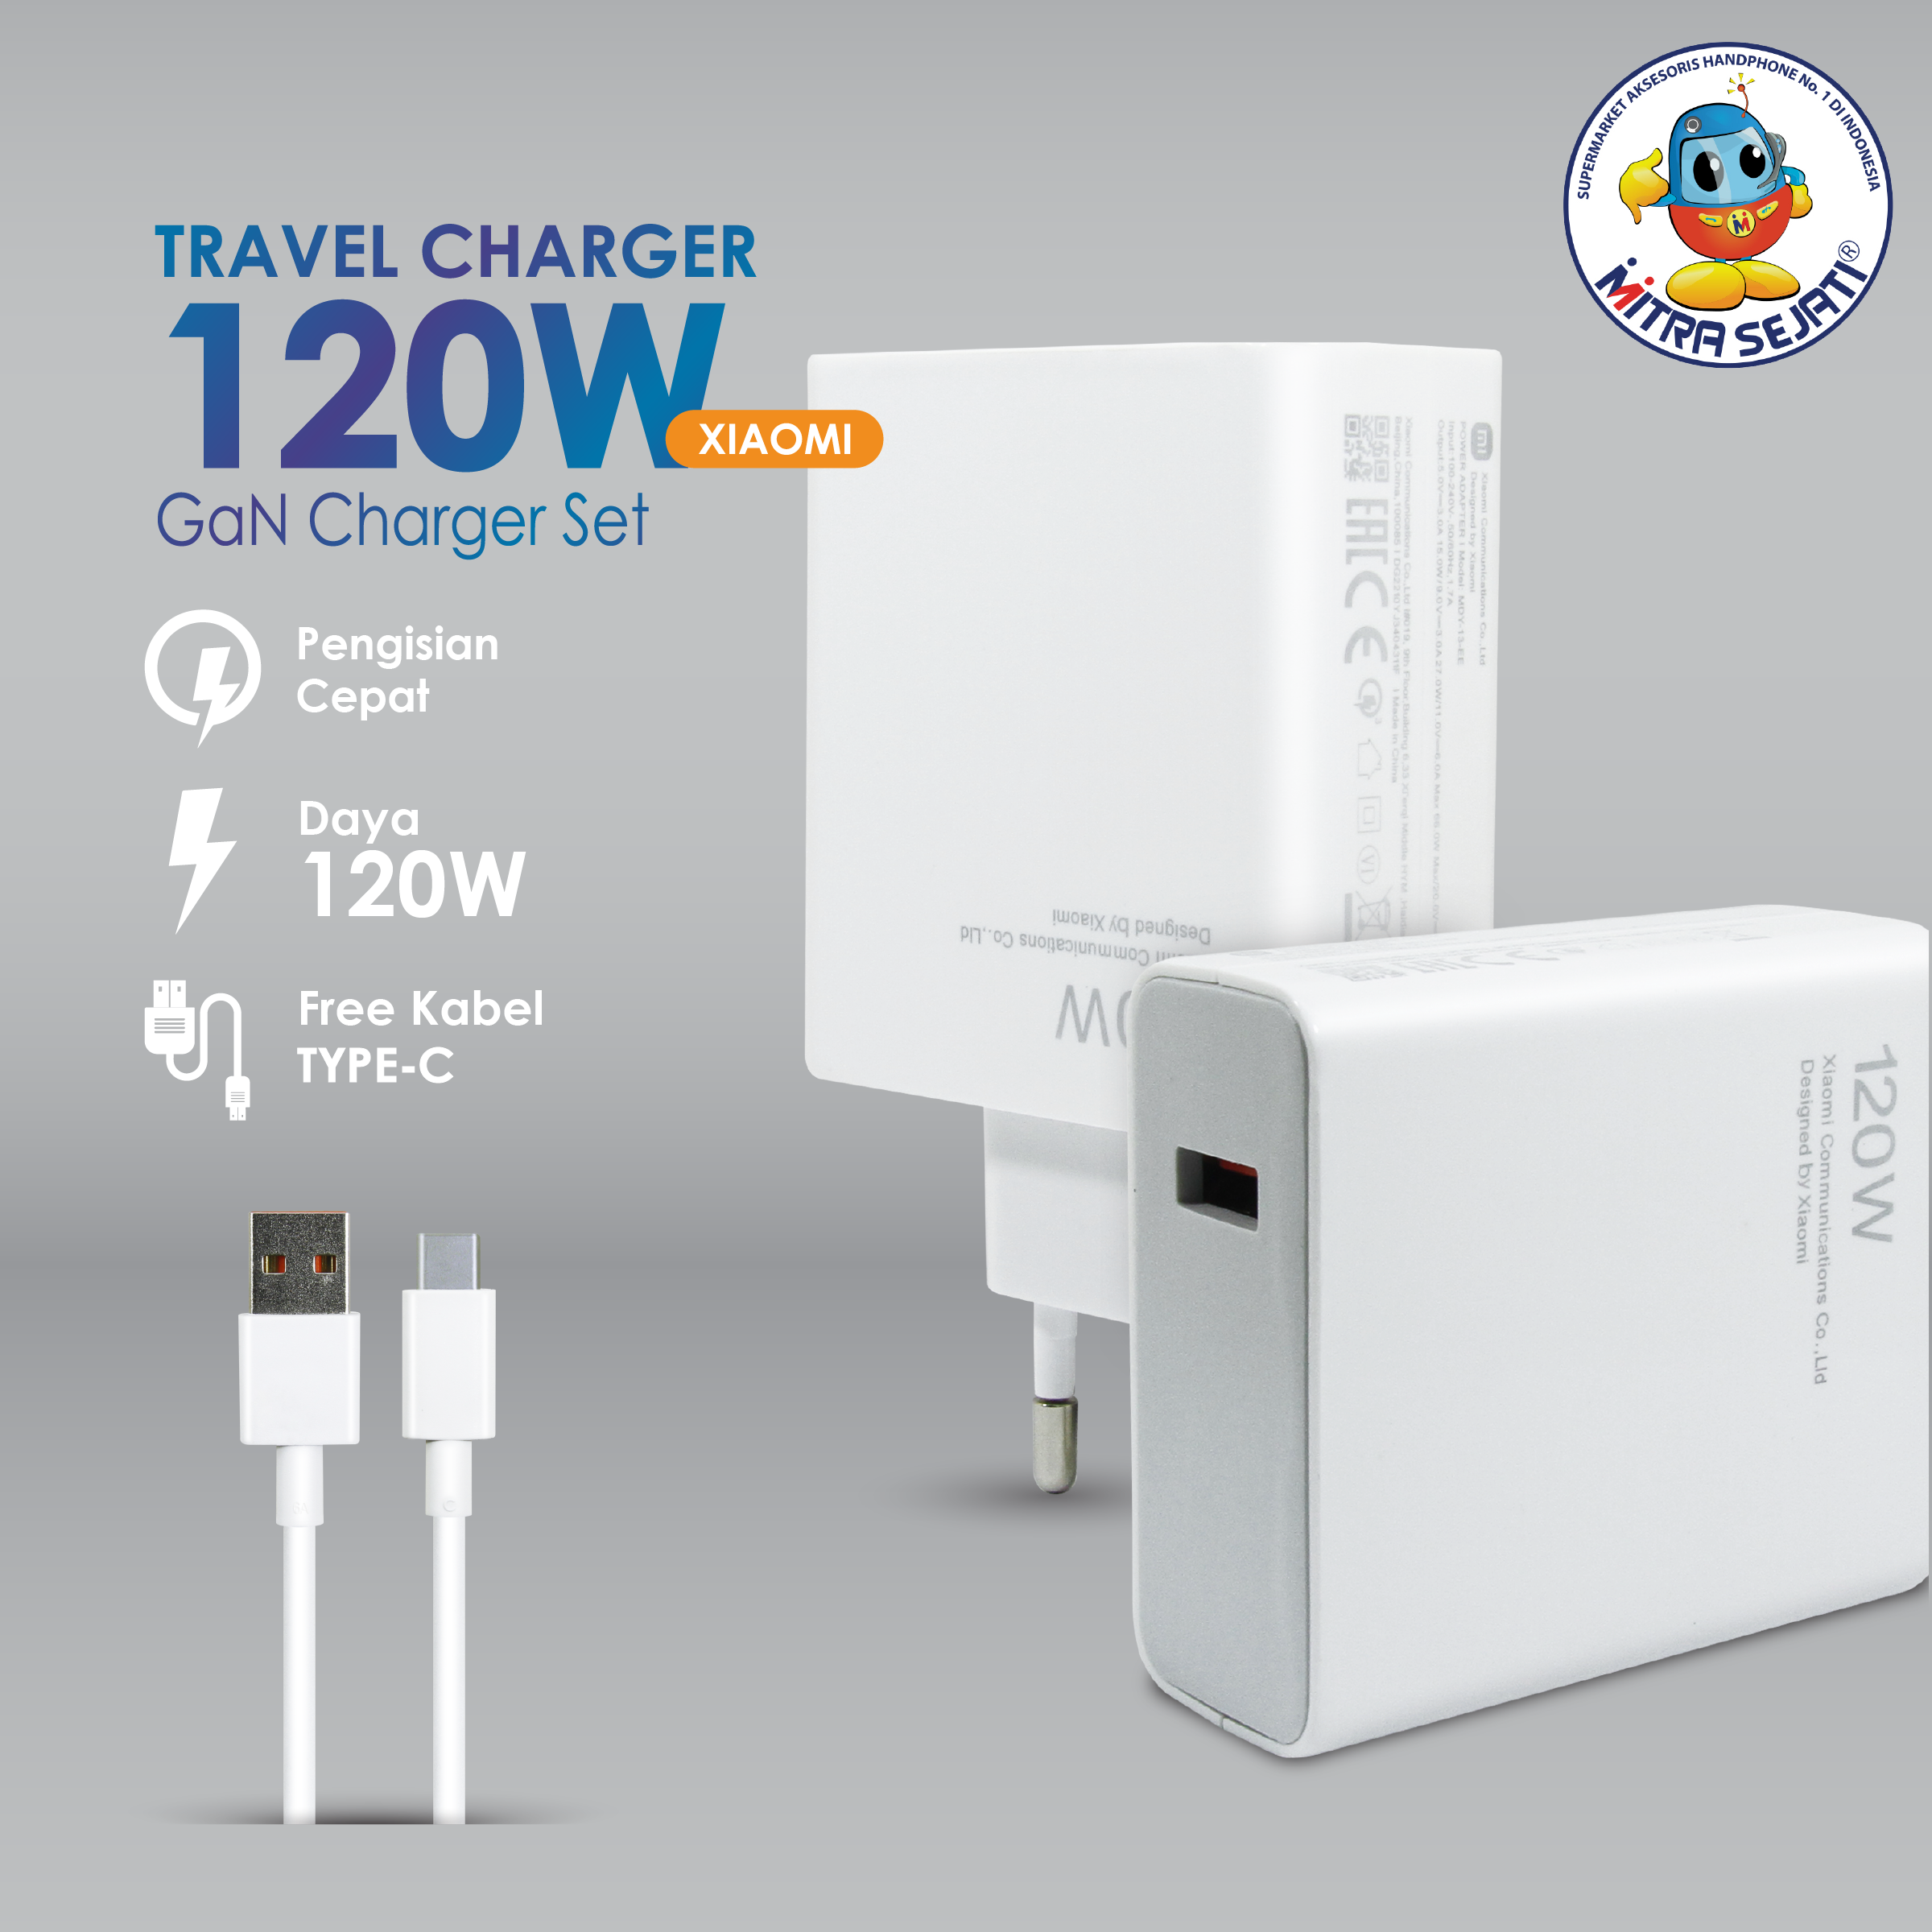 Travel Charger 120W Xiaomi Fast Charging USB Type-C